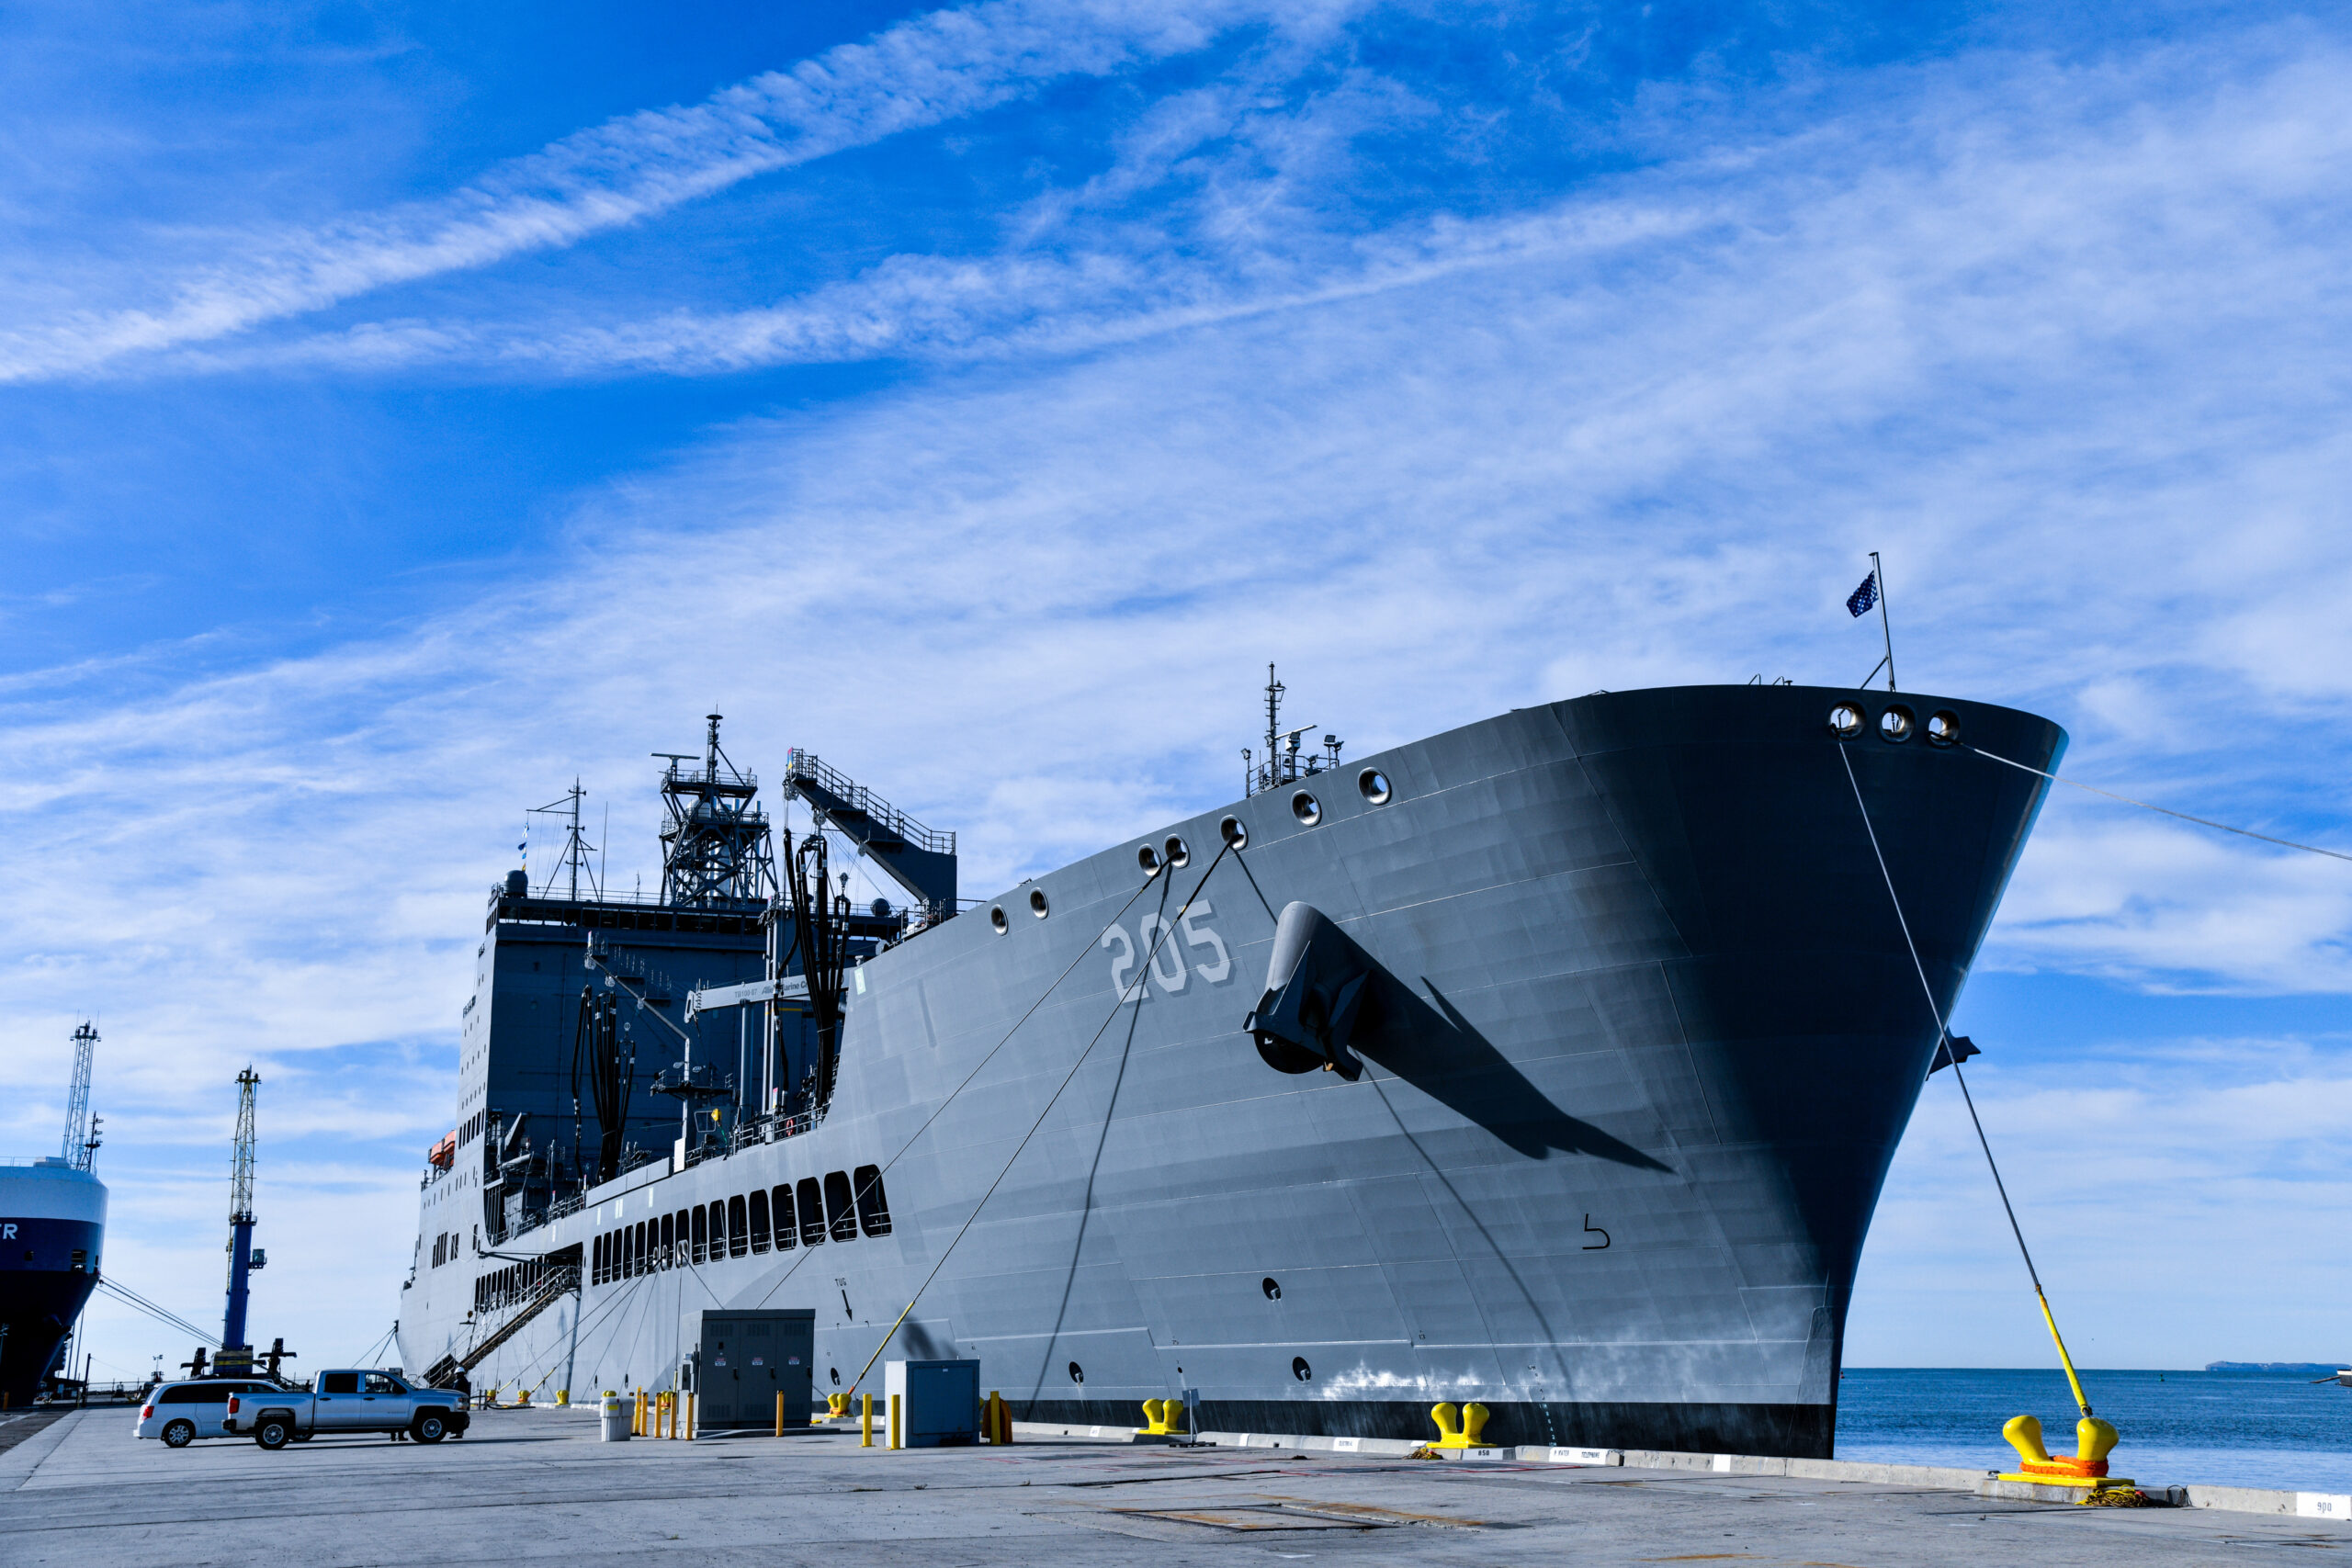 USNS John Lewis (T-AO 205) sits pierside at Naval Surface Warfare Center, Port Hueneme Division (NSWC PHD), Friday, Nov. 4. The U.S. Navy fleet replenishment oiler, delivered to Military Sealift Command in July, is in the beginning months of its year-long ship qualification trials schedule and stopped by NSWC PHD for a stores resupply and minor repairs by builder representatives. The Underway Replenishment (UNREP) fuel and cargo delivery stations aboard the civilian-crewed ship use the new Electric Standard Tensioned Replenishment Alongside Method (E-STREAM) technology, designed by NSWC PHD UNREP engineers. USNS John Lewis is the first oiler to have the new E-STREAM systems on board, and the command’s UNREP team members were excited to see in person the system installed on a ship. (U.S. Navy photo by Dana Rene White/Released)